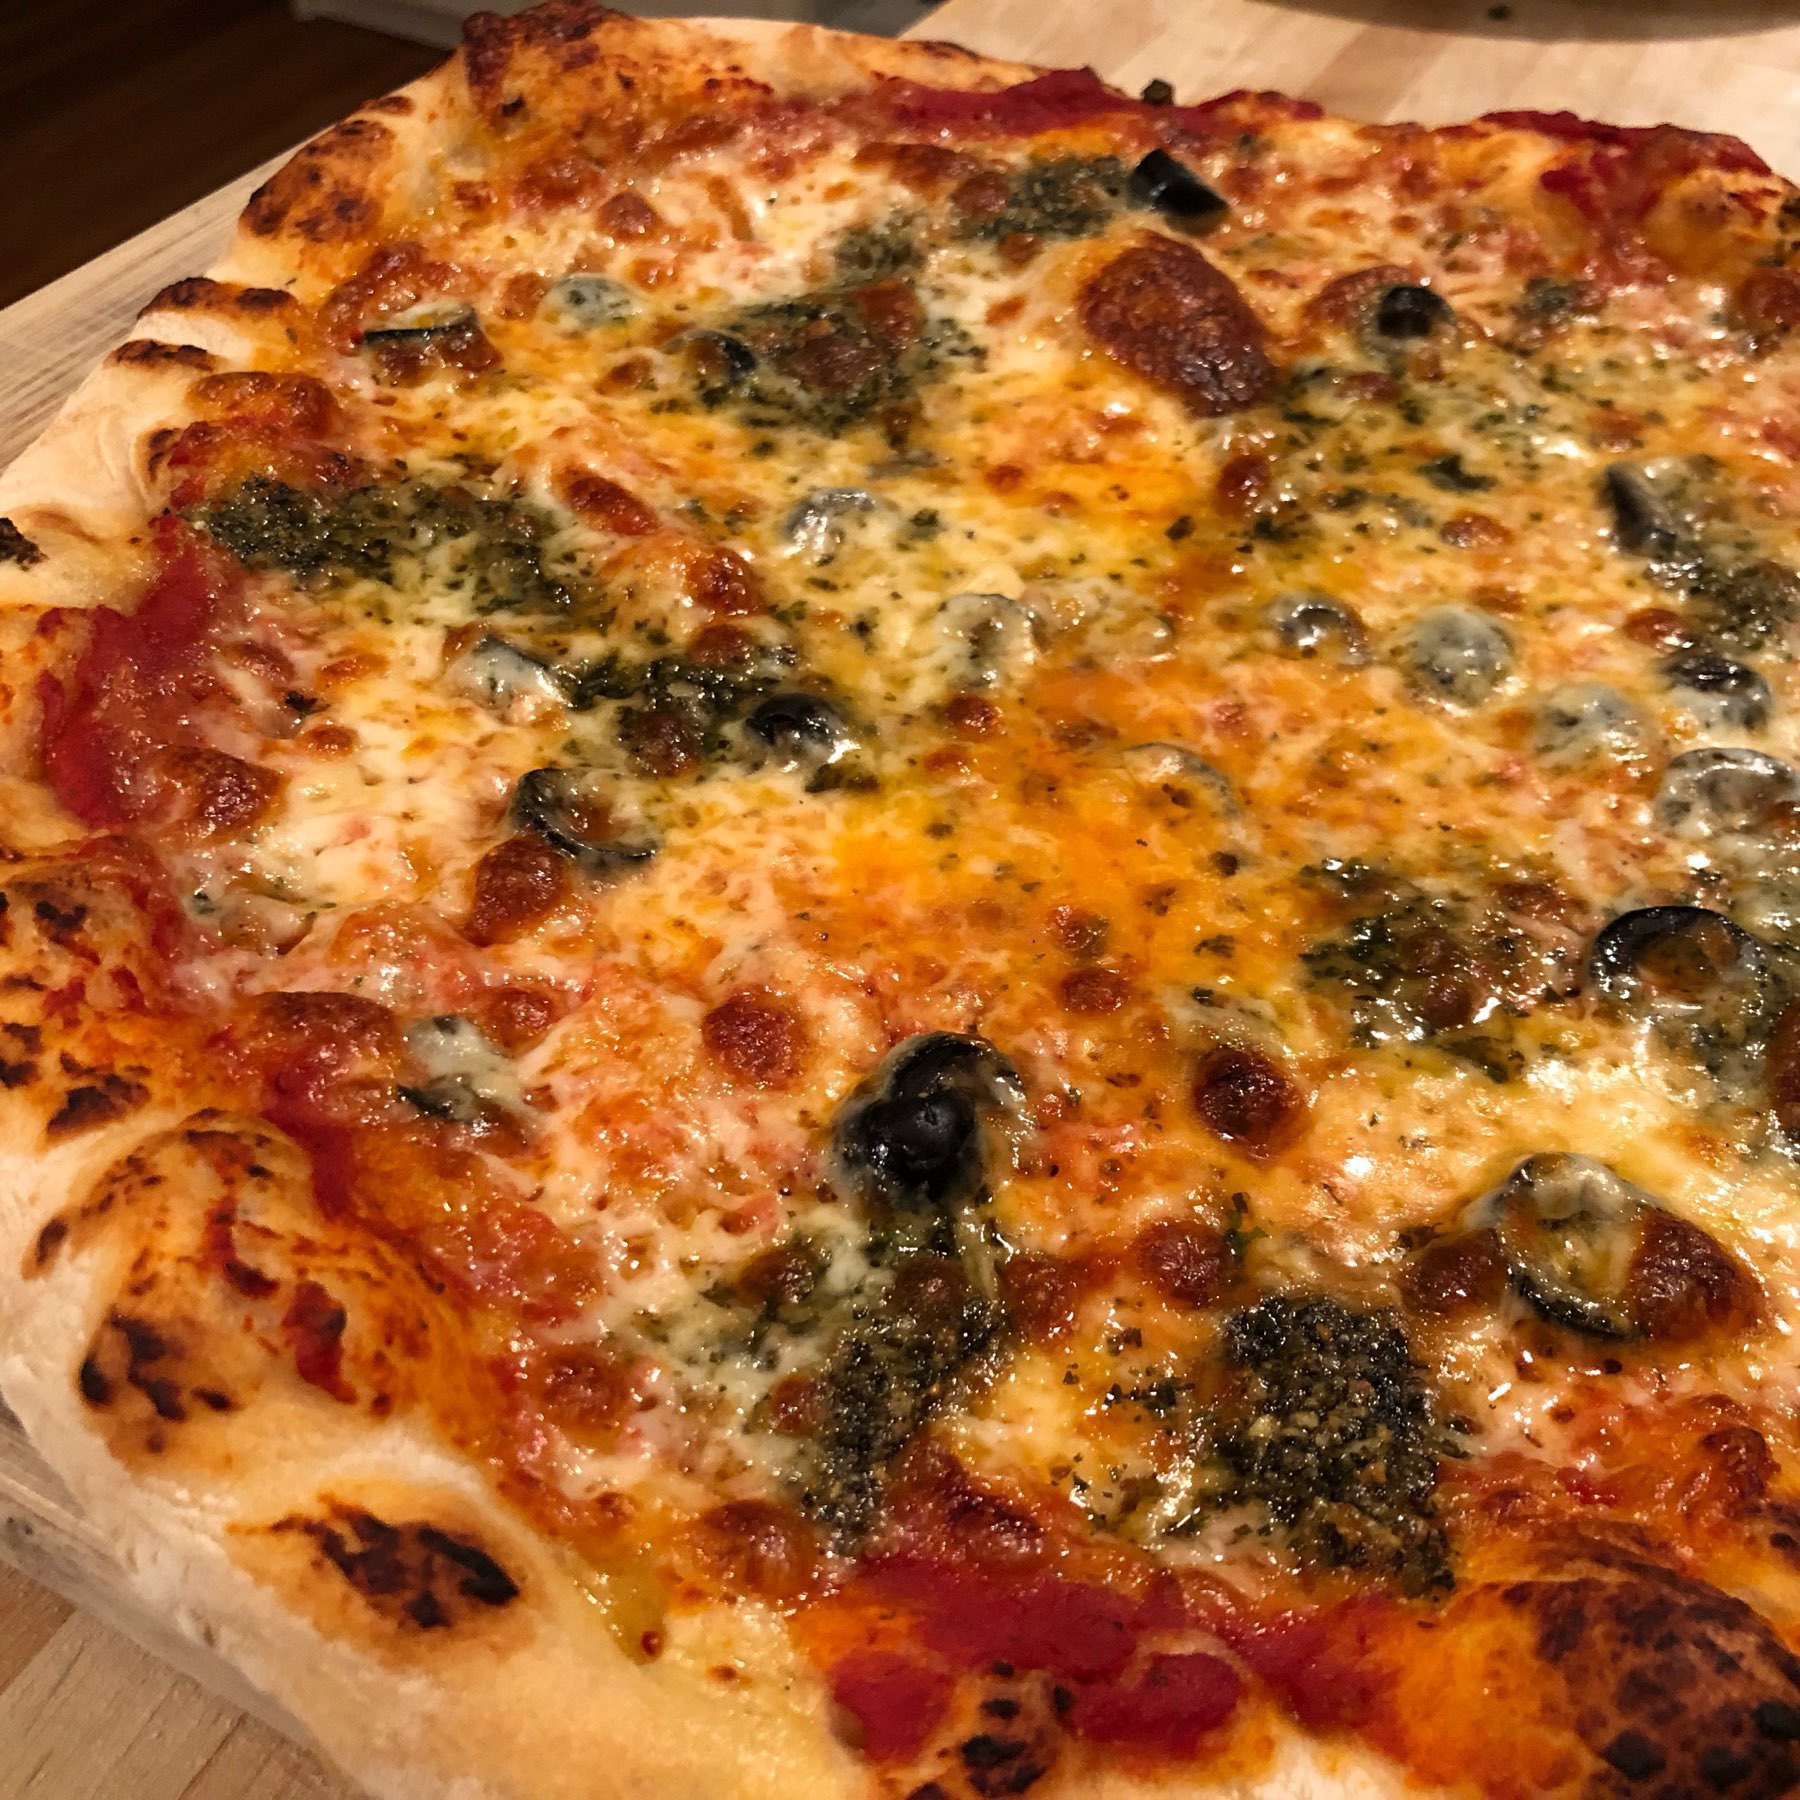 Home-baked pizza with cheese, pesto, olives, tomato sauce.